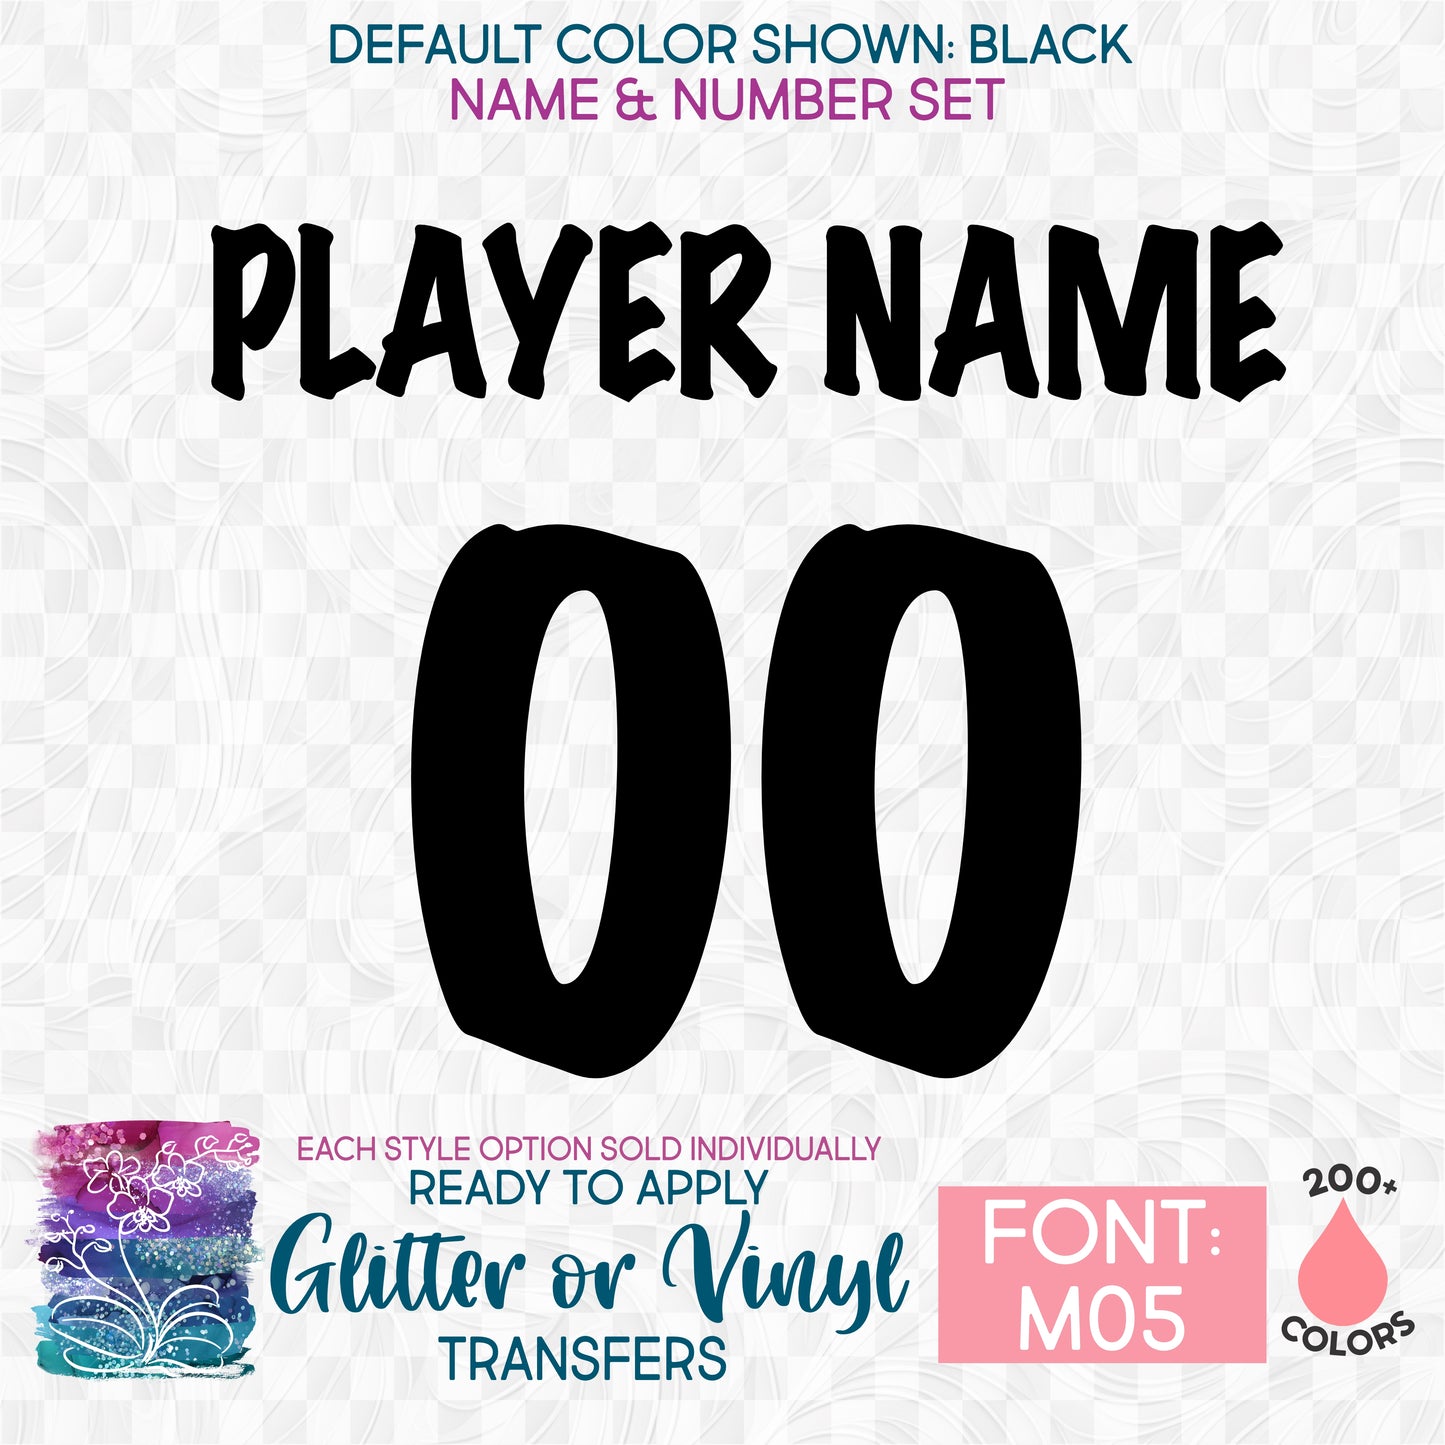 (s97-M05) Custom Player Perfect Name & Number Iron-On Transfer